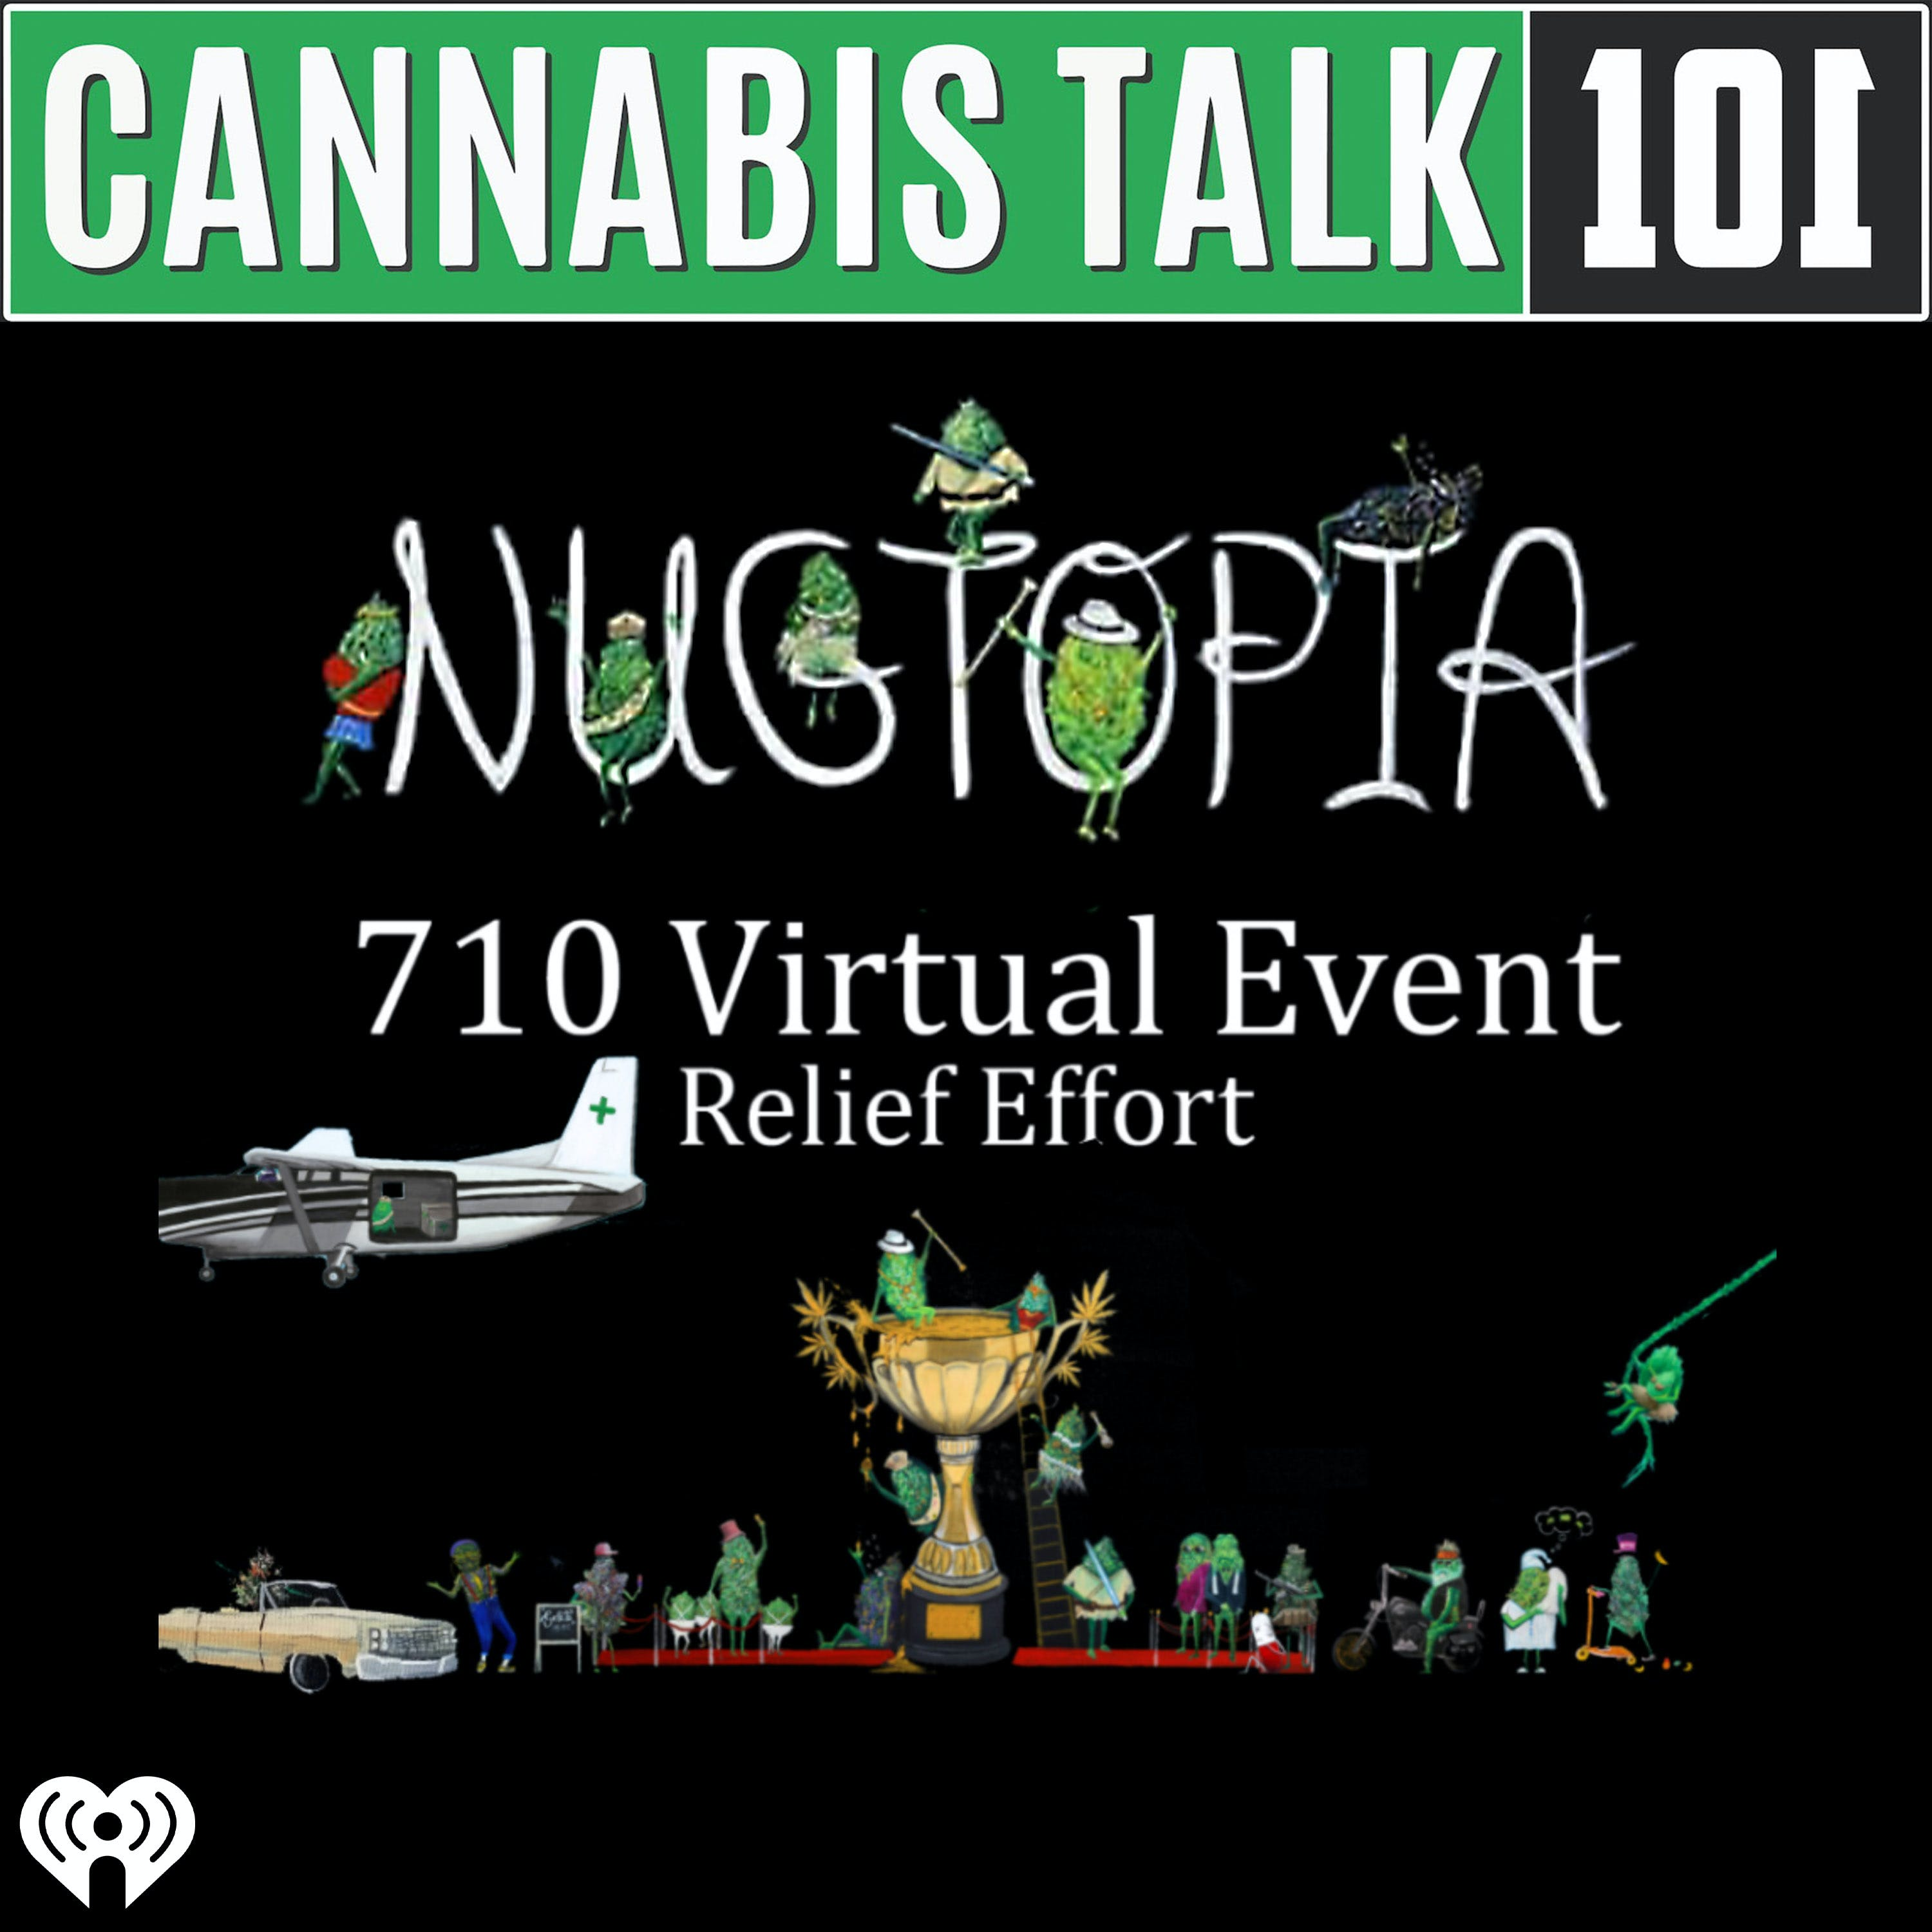 Kyle Trent from Nugtopia discusses his Virtual event on 710.